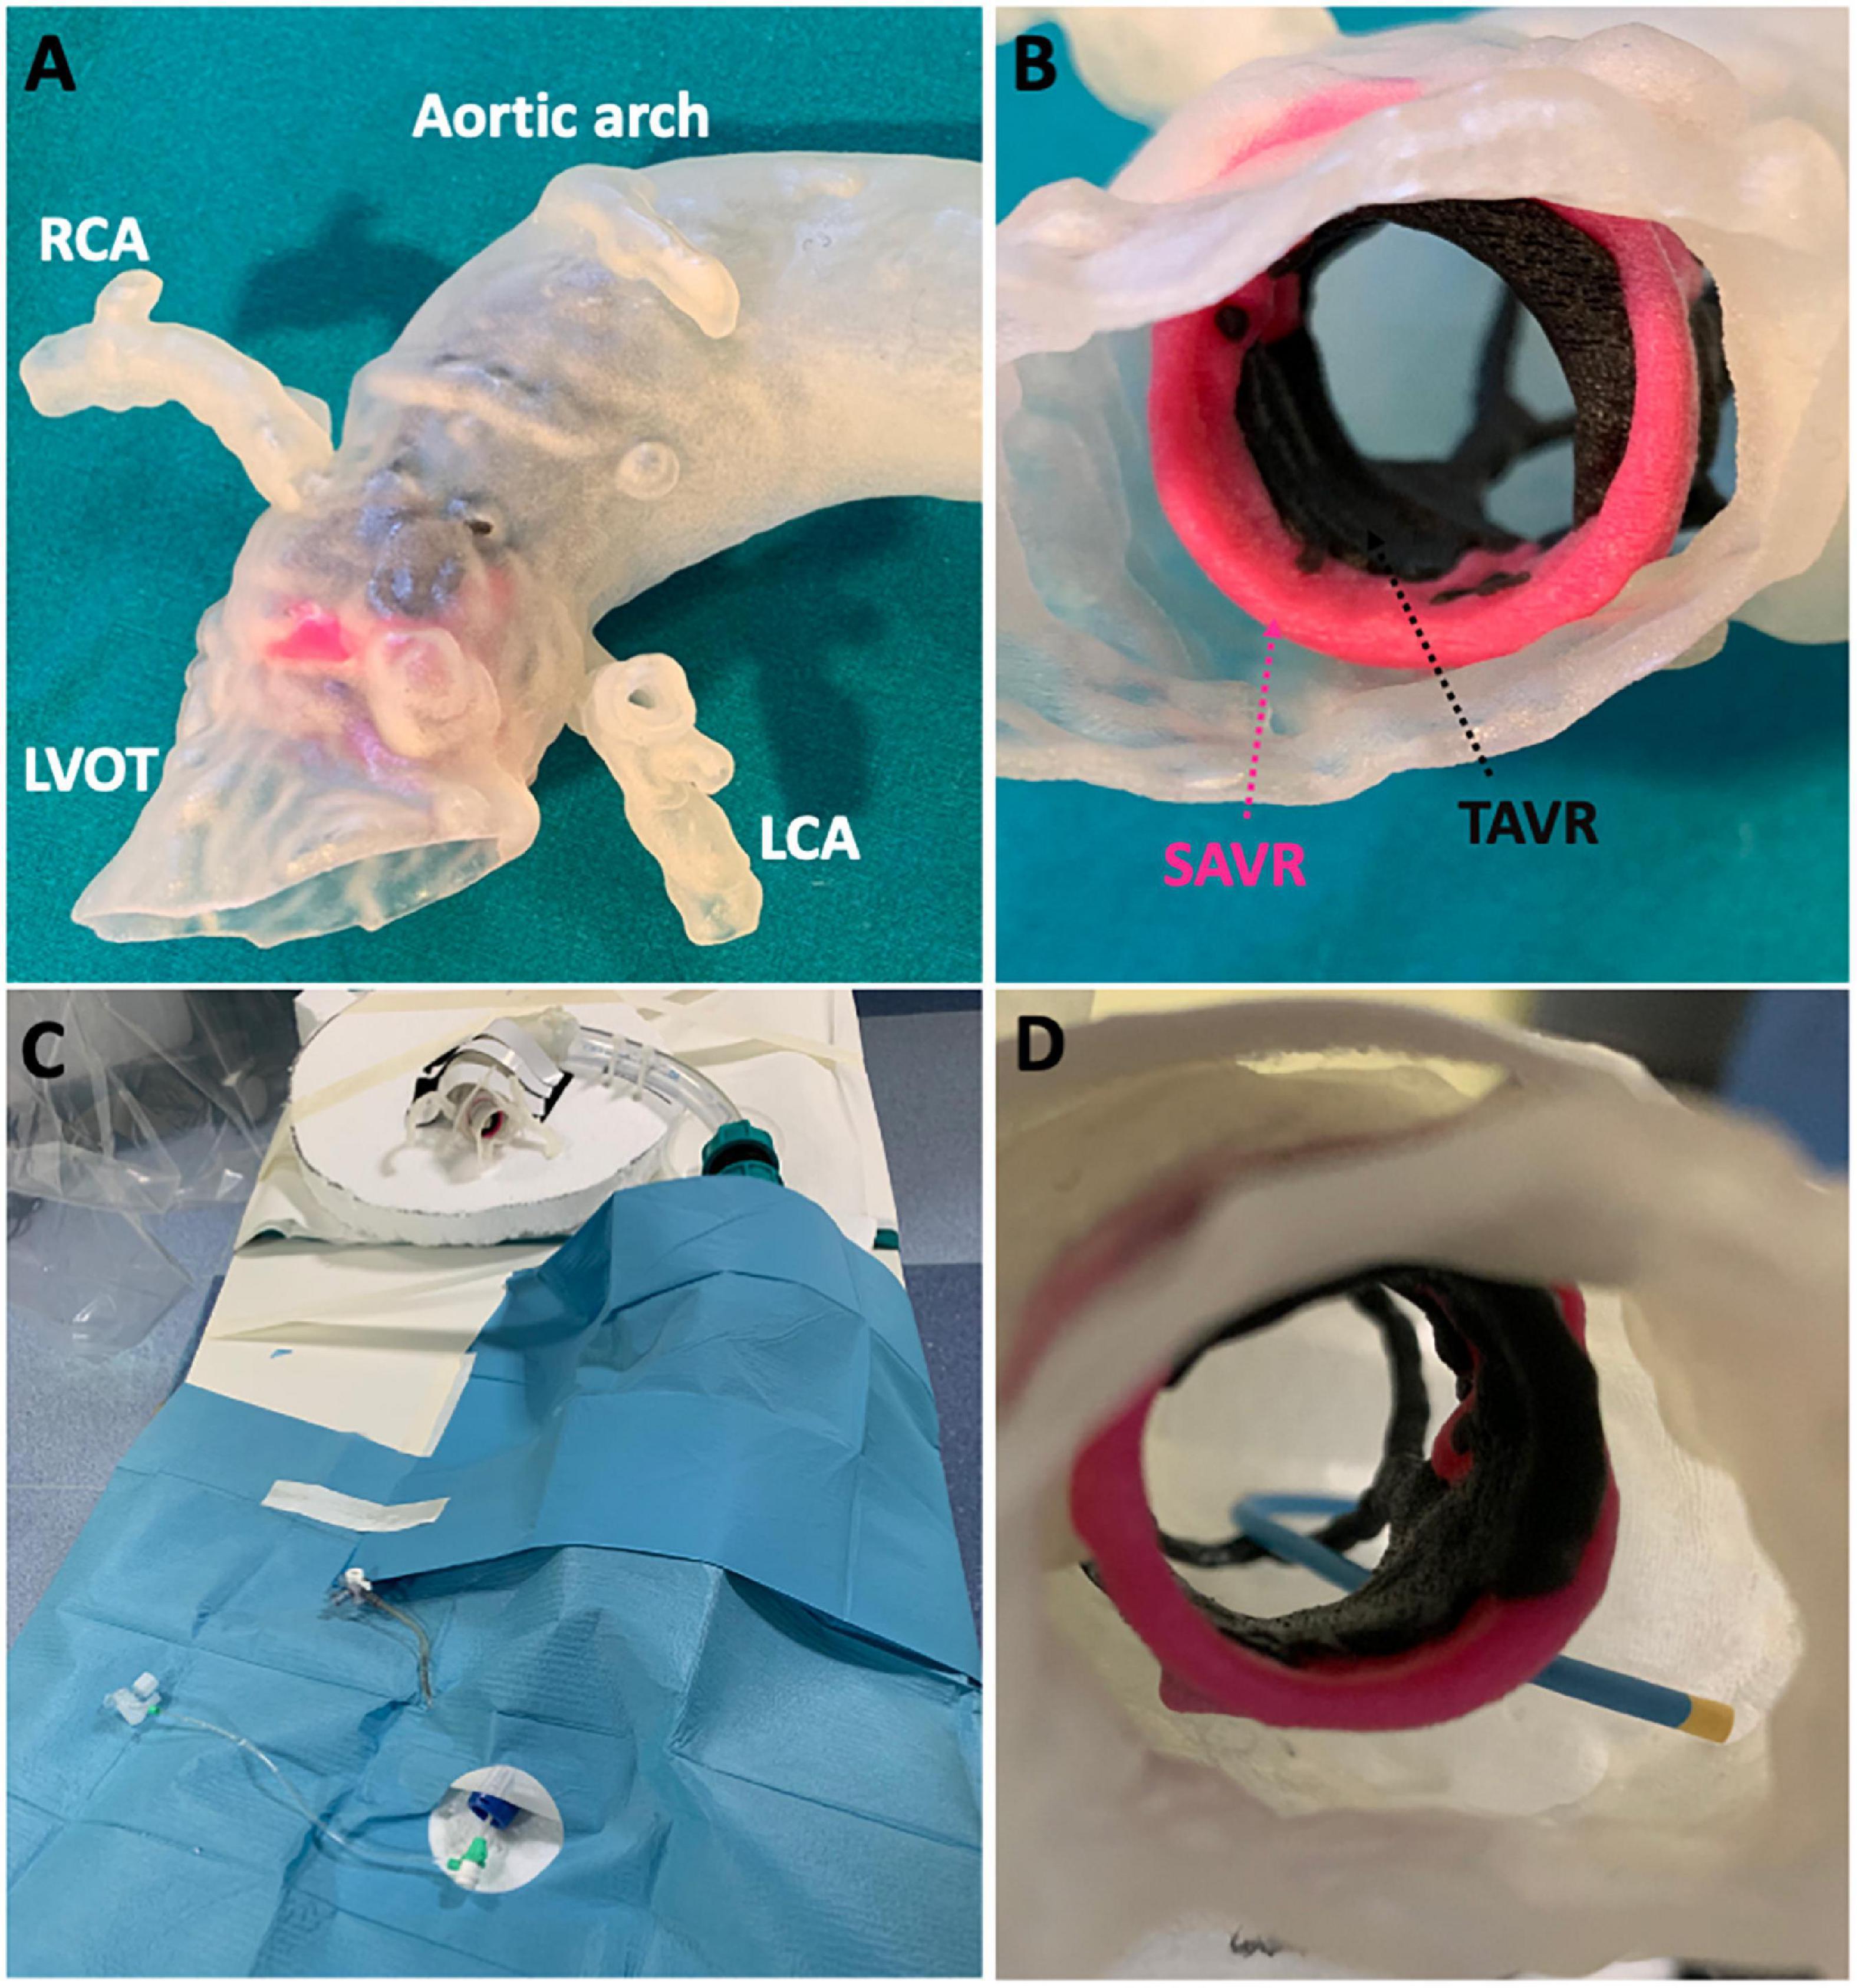 Frontiers Coronary access following ACURATE neo implantation for transcatheter aortic valve-in-valve implantation Ex vivo analysis in patient-specific anatomies